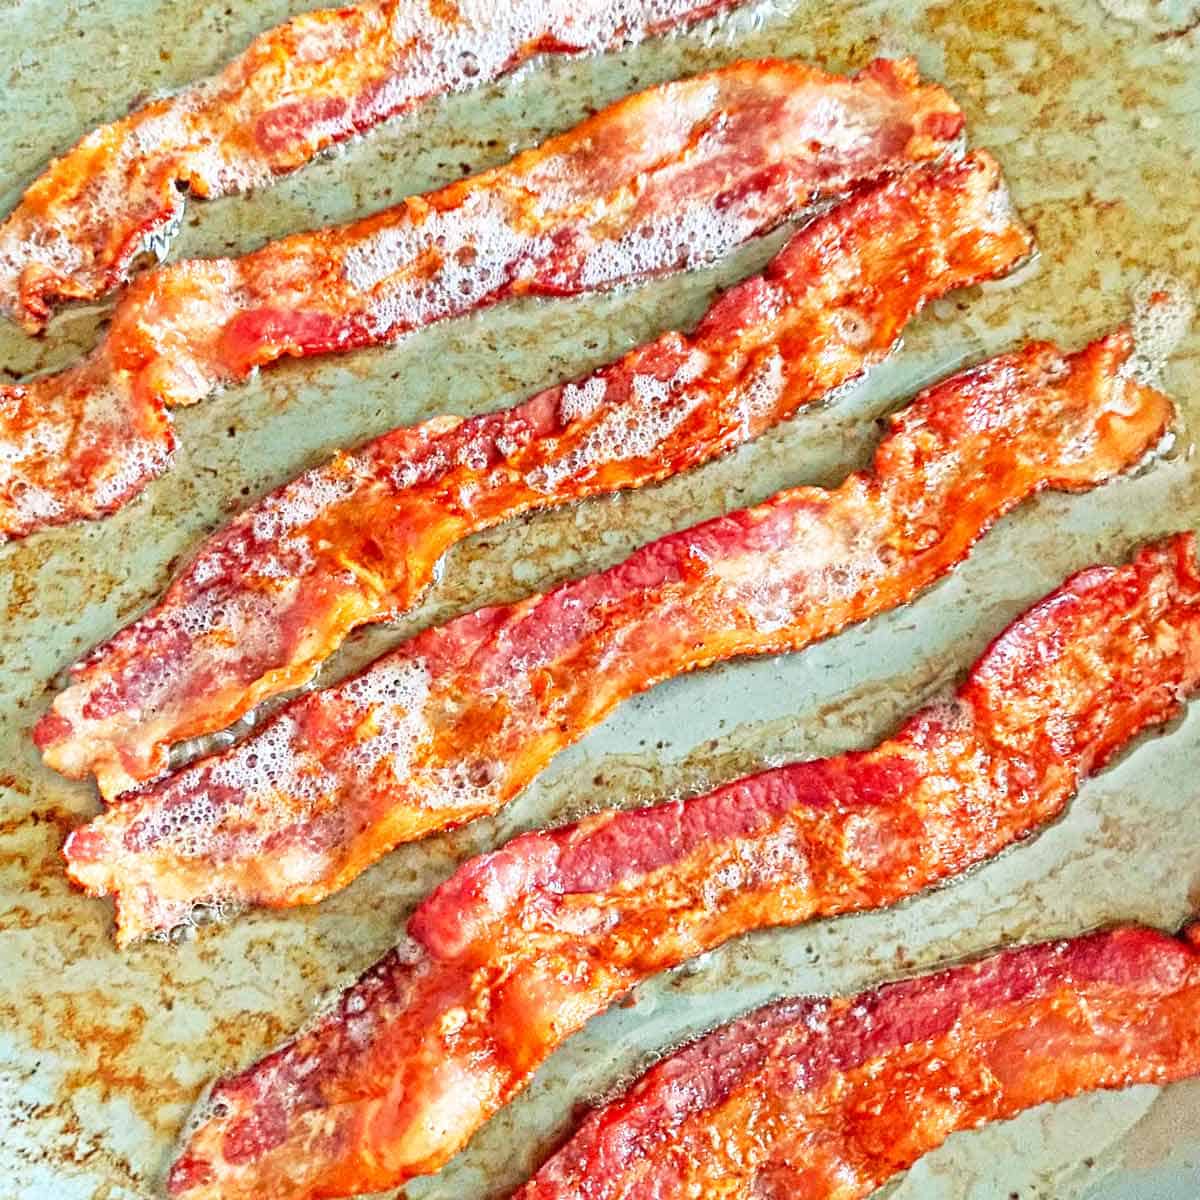 Six strips of bacon in a nonstick skillet.